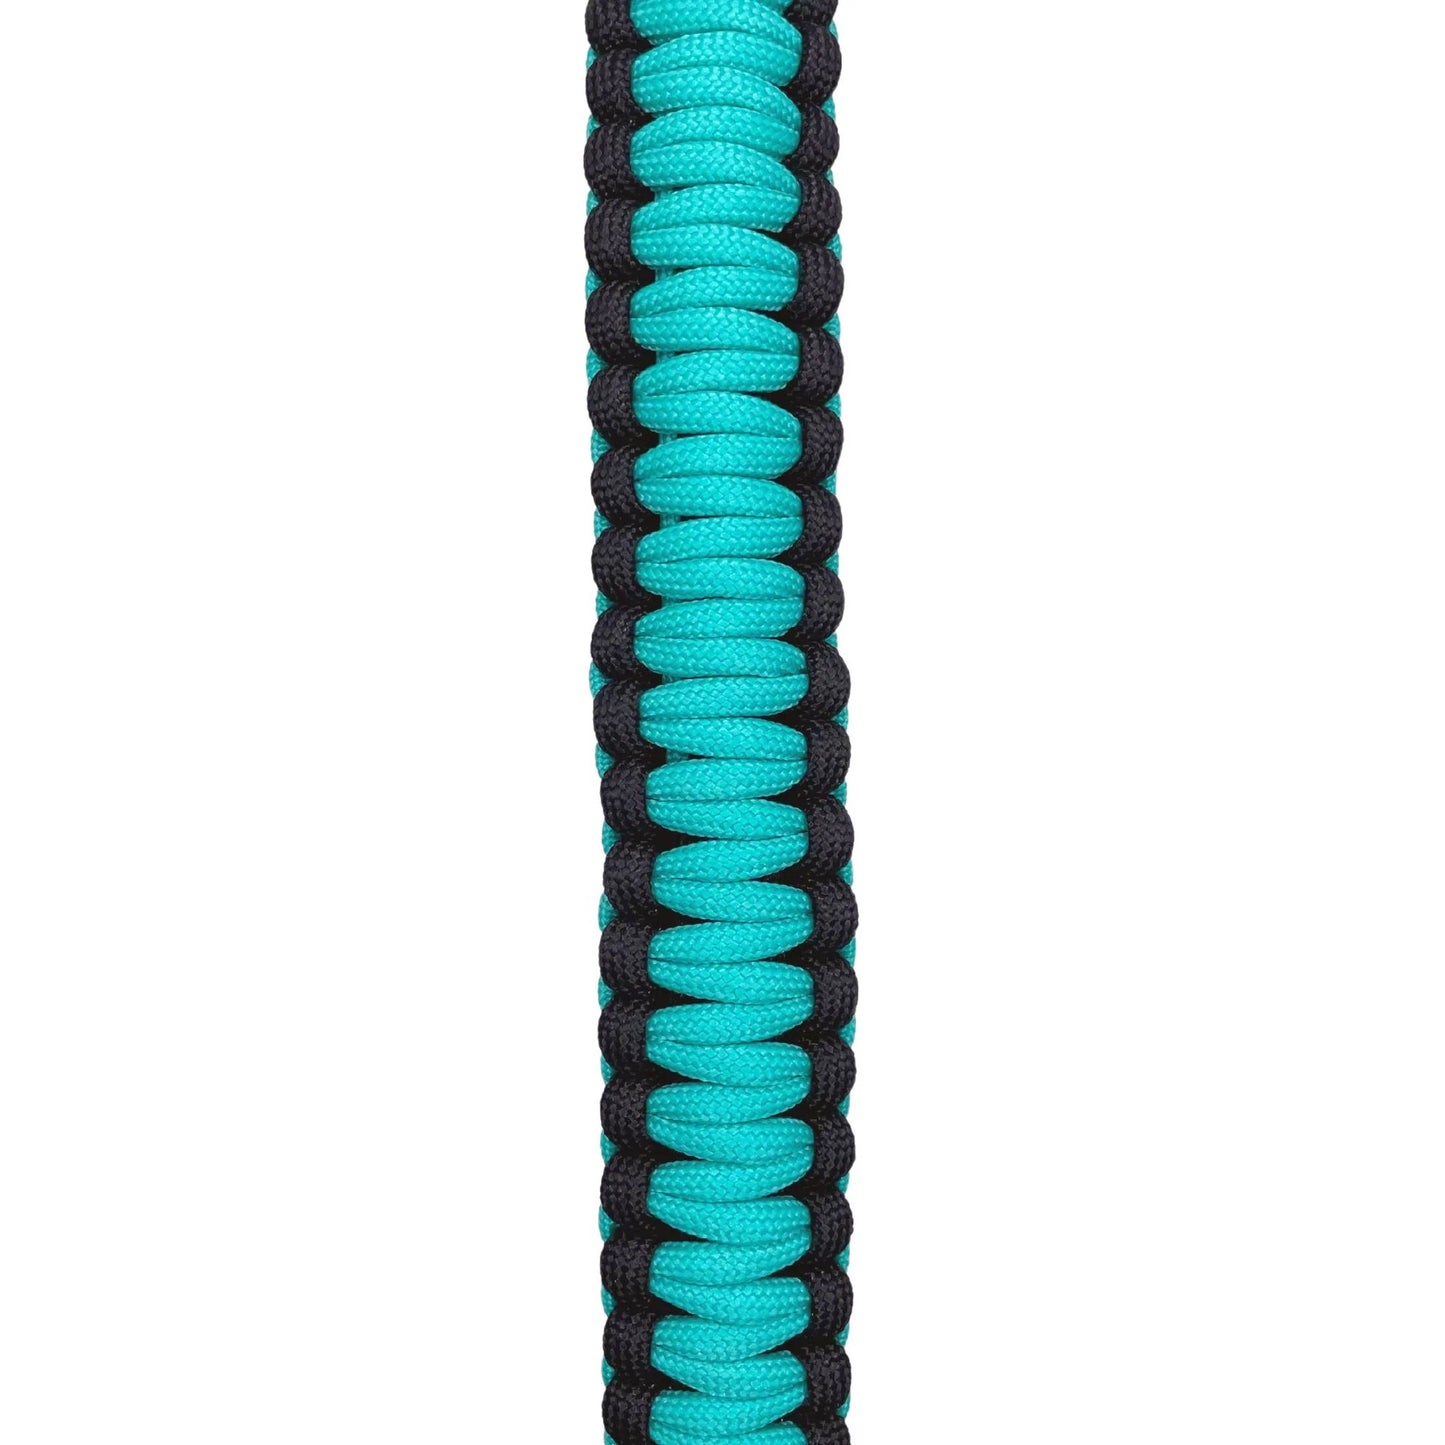 Top selling bright teal Paracord dog leash with locking carabiner and non-slip grip